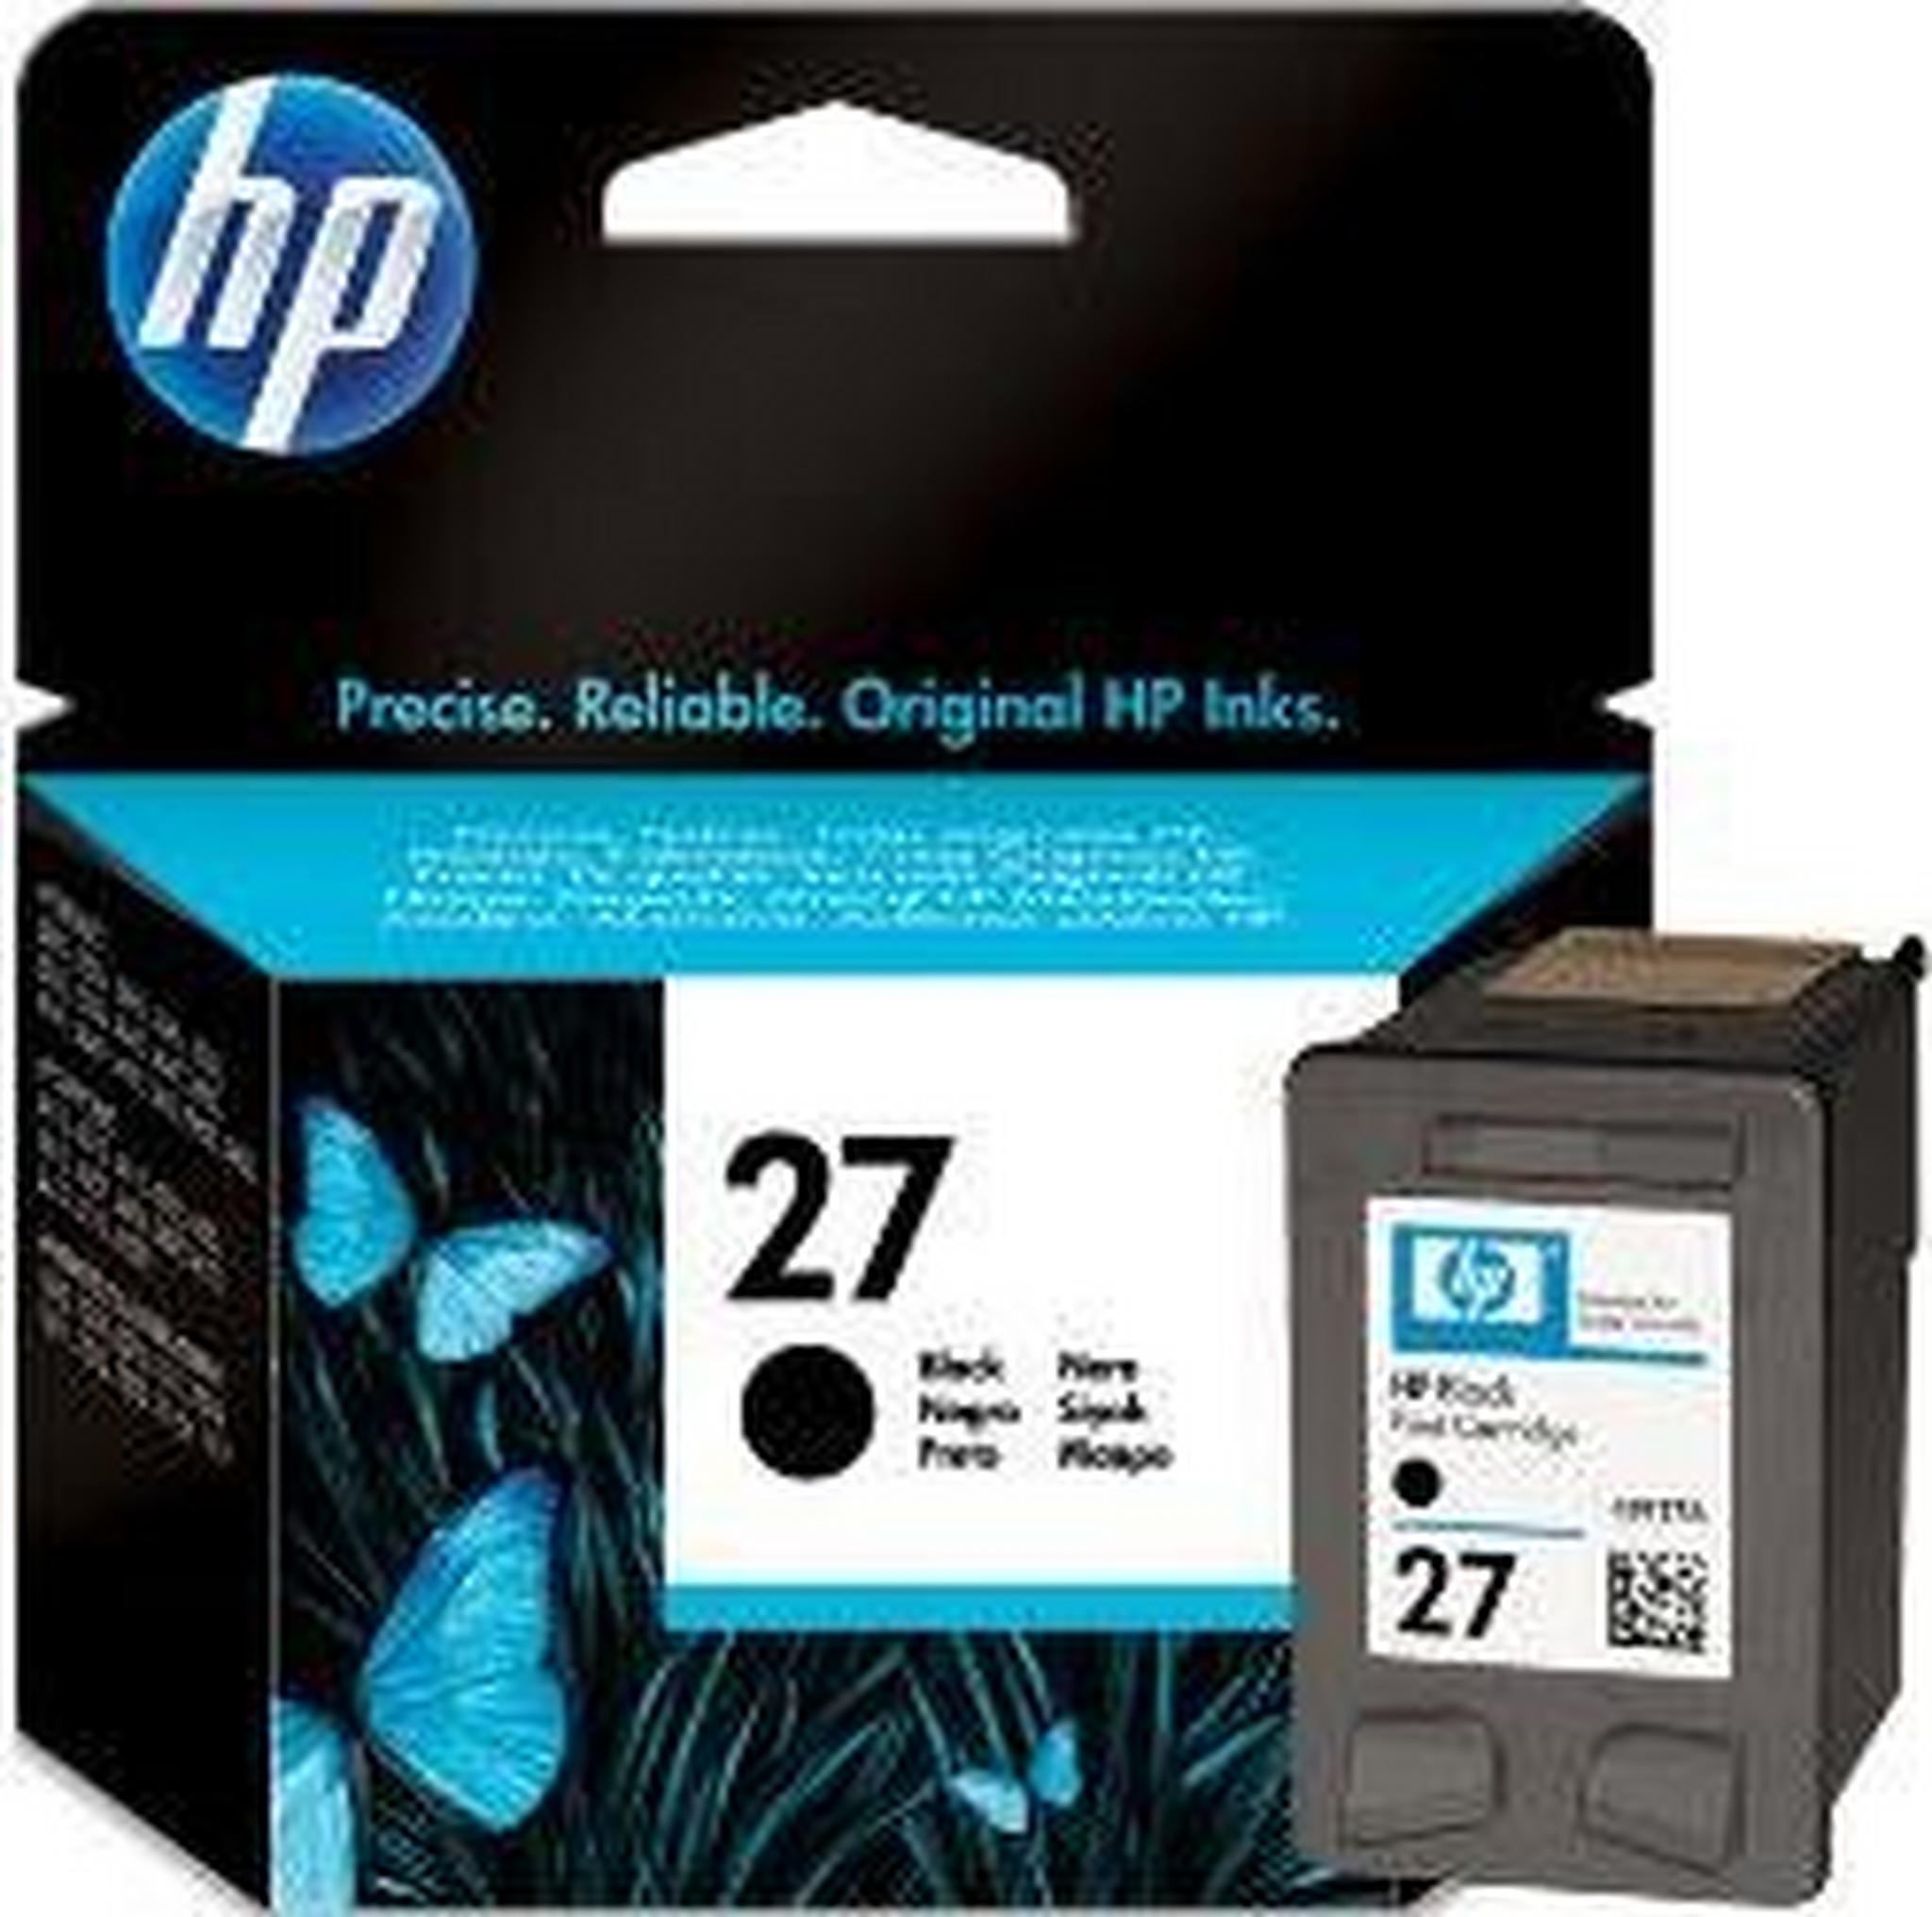 HP Ink 27B for Inkjet Printing 280 Page Yield - Black (Single Pack)